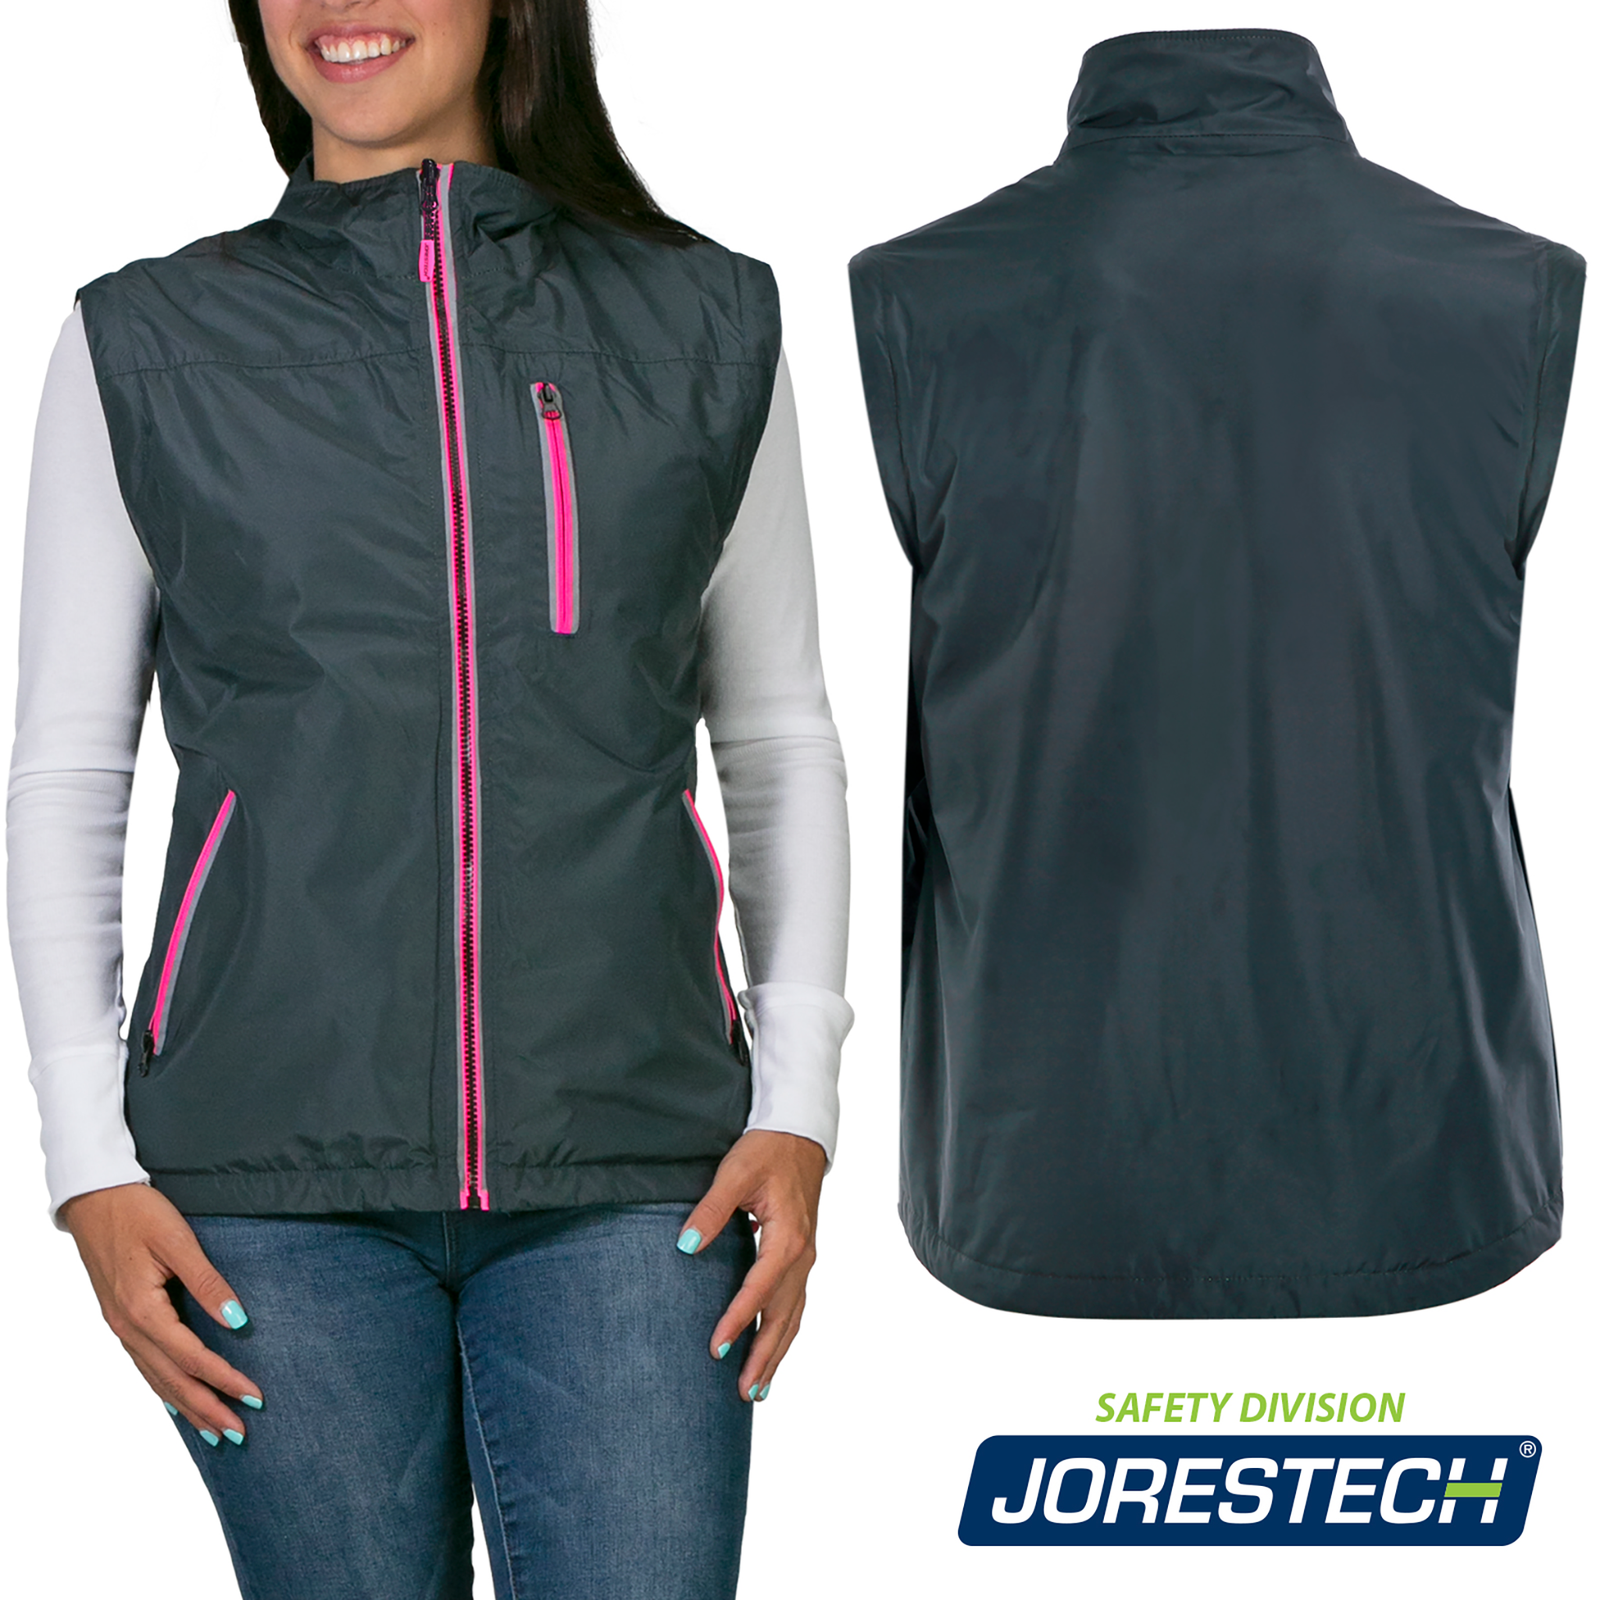 Lady wearing the non reflective combination of gray and pink in the vest version